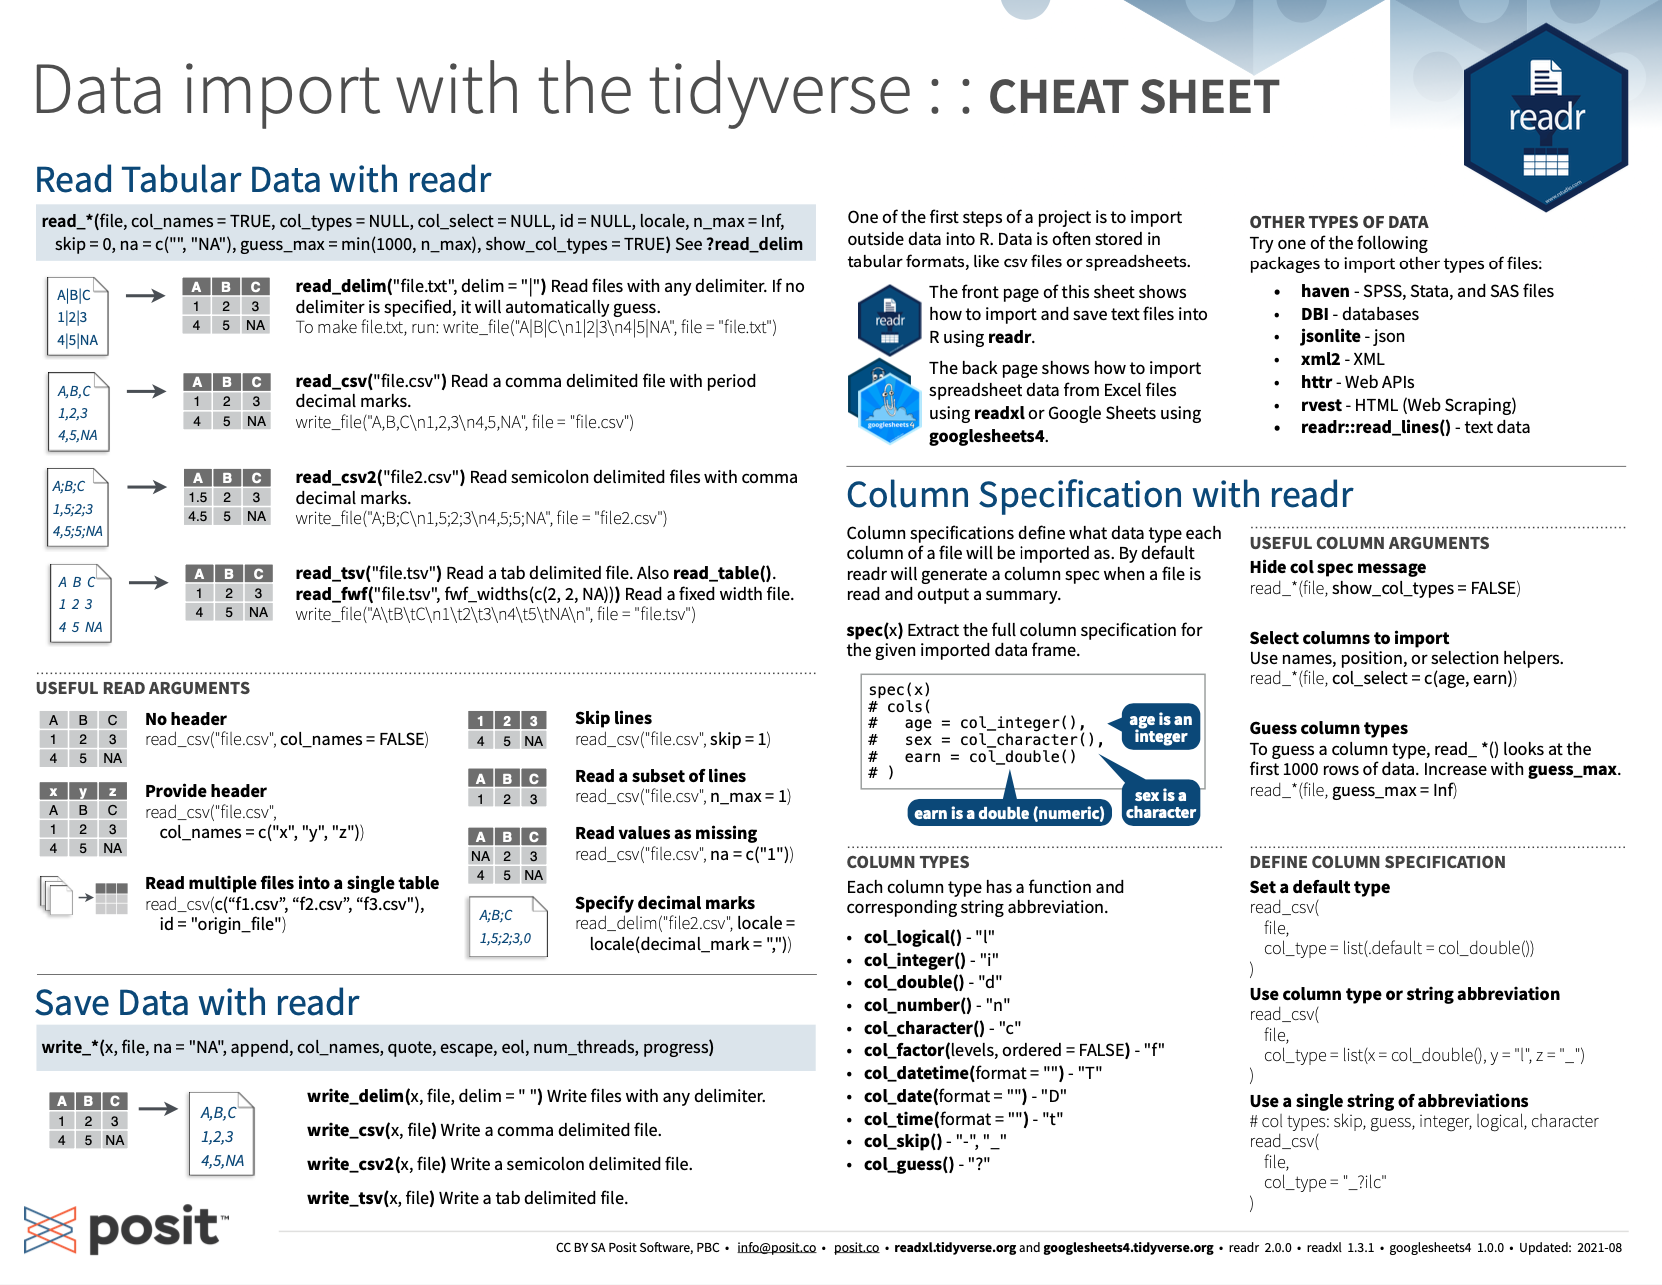 The RStudio cheatsheet on importing and exporting data with the readr package.